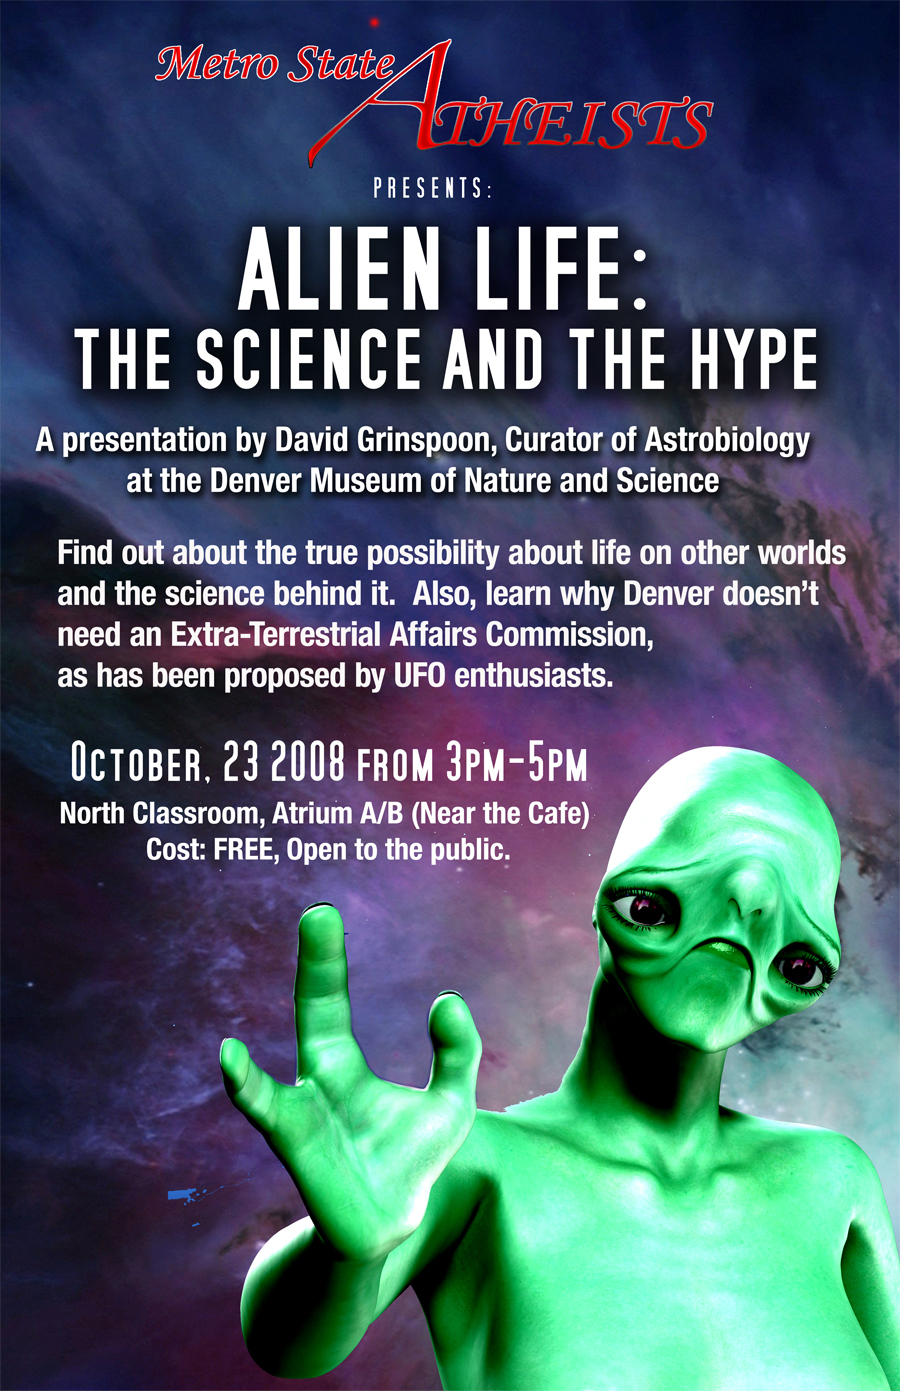 //metrostateatheists.files.wordpress.com/2008/10/alien-life-flyer21.jpg&rdquo; cannot be displayed, because it contains errors.